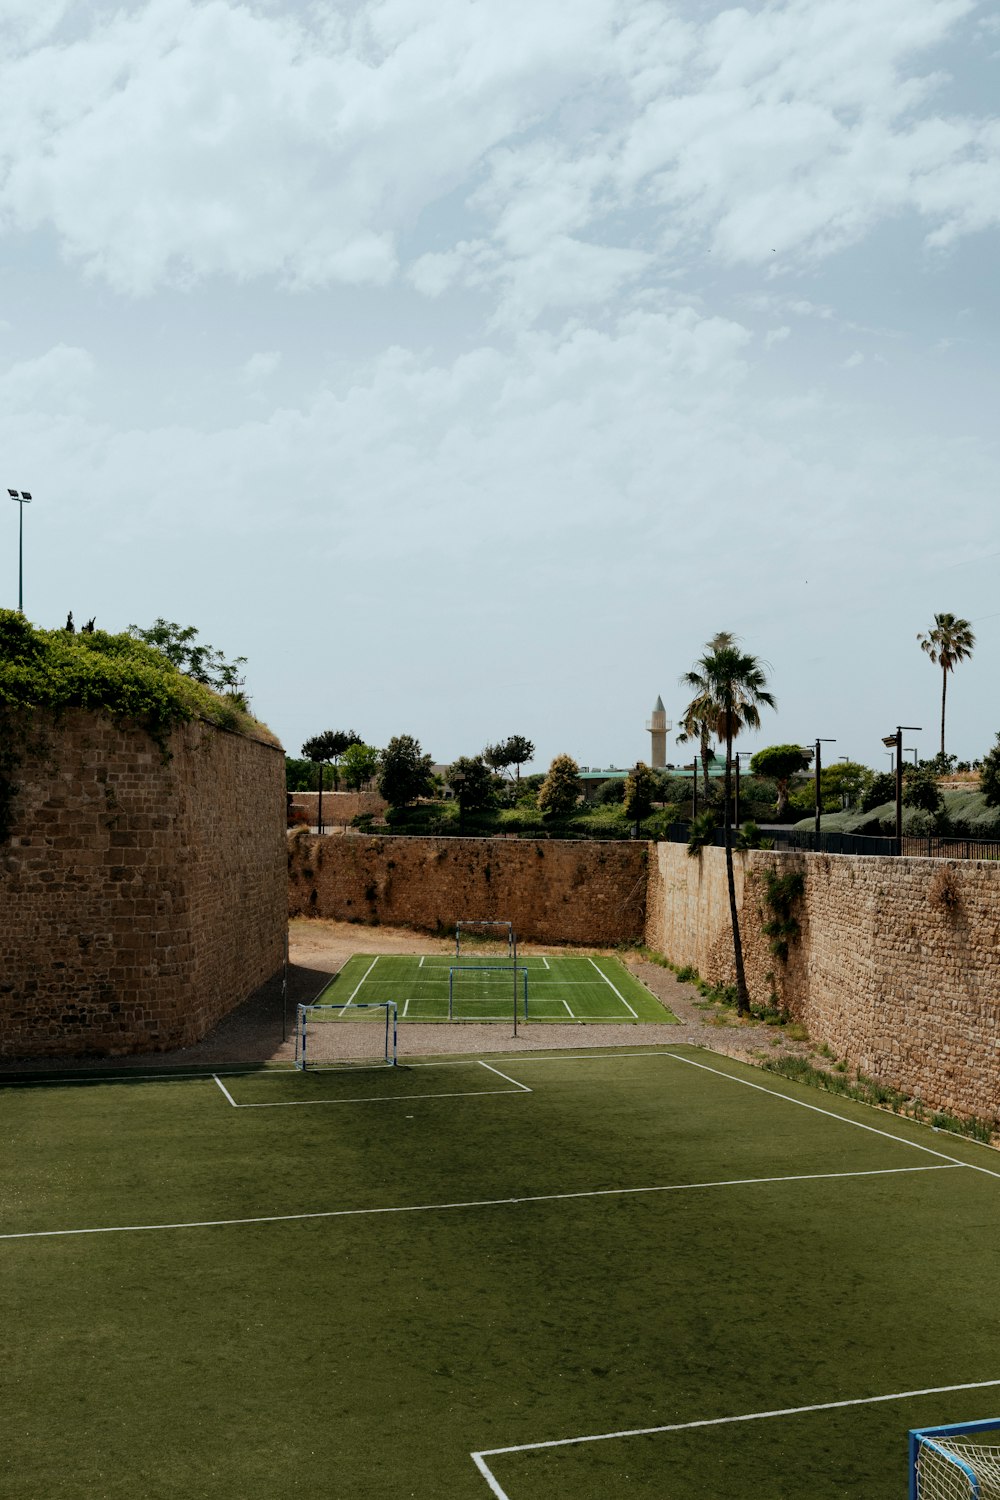 a tennis court surrounded by a stone wall